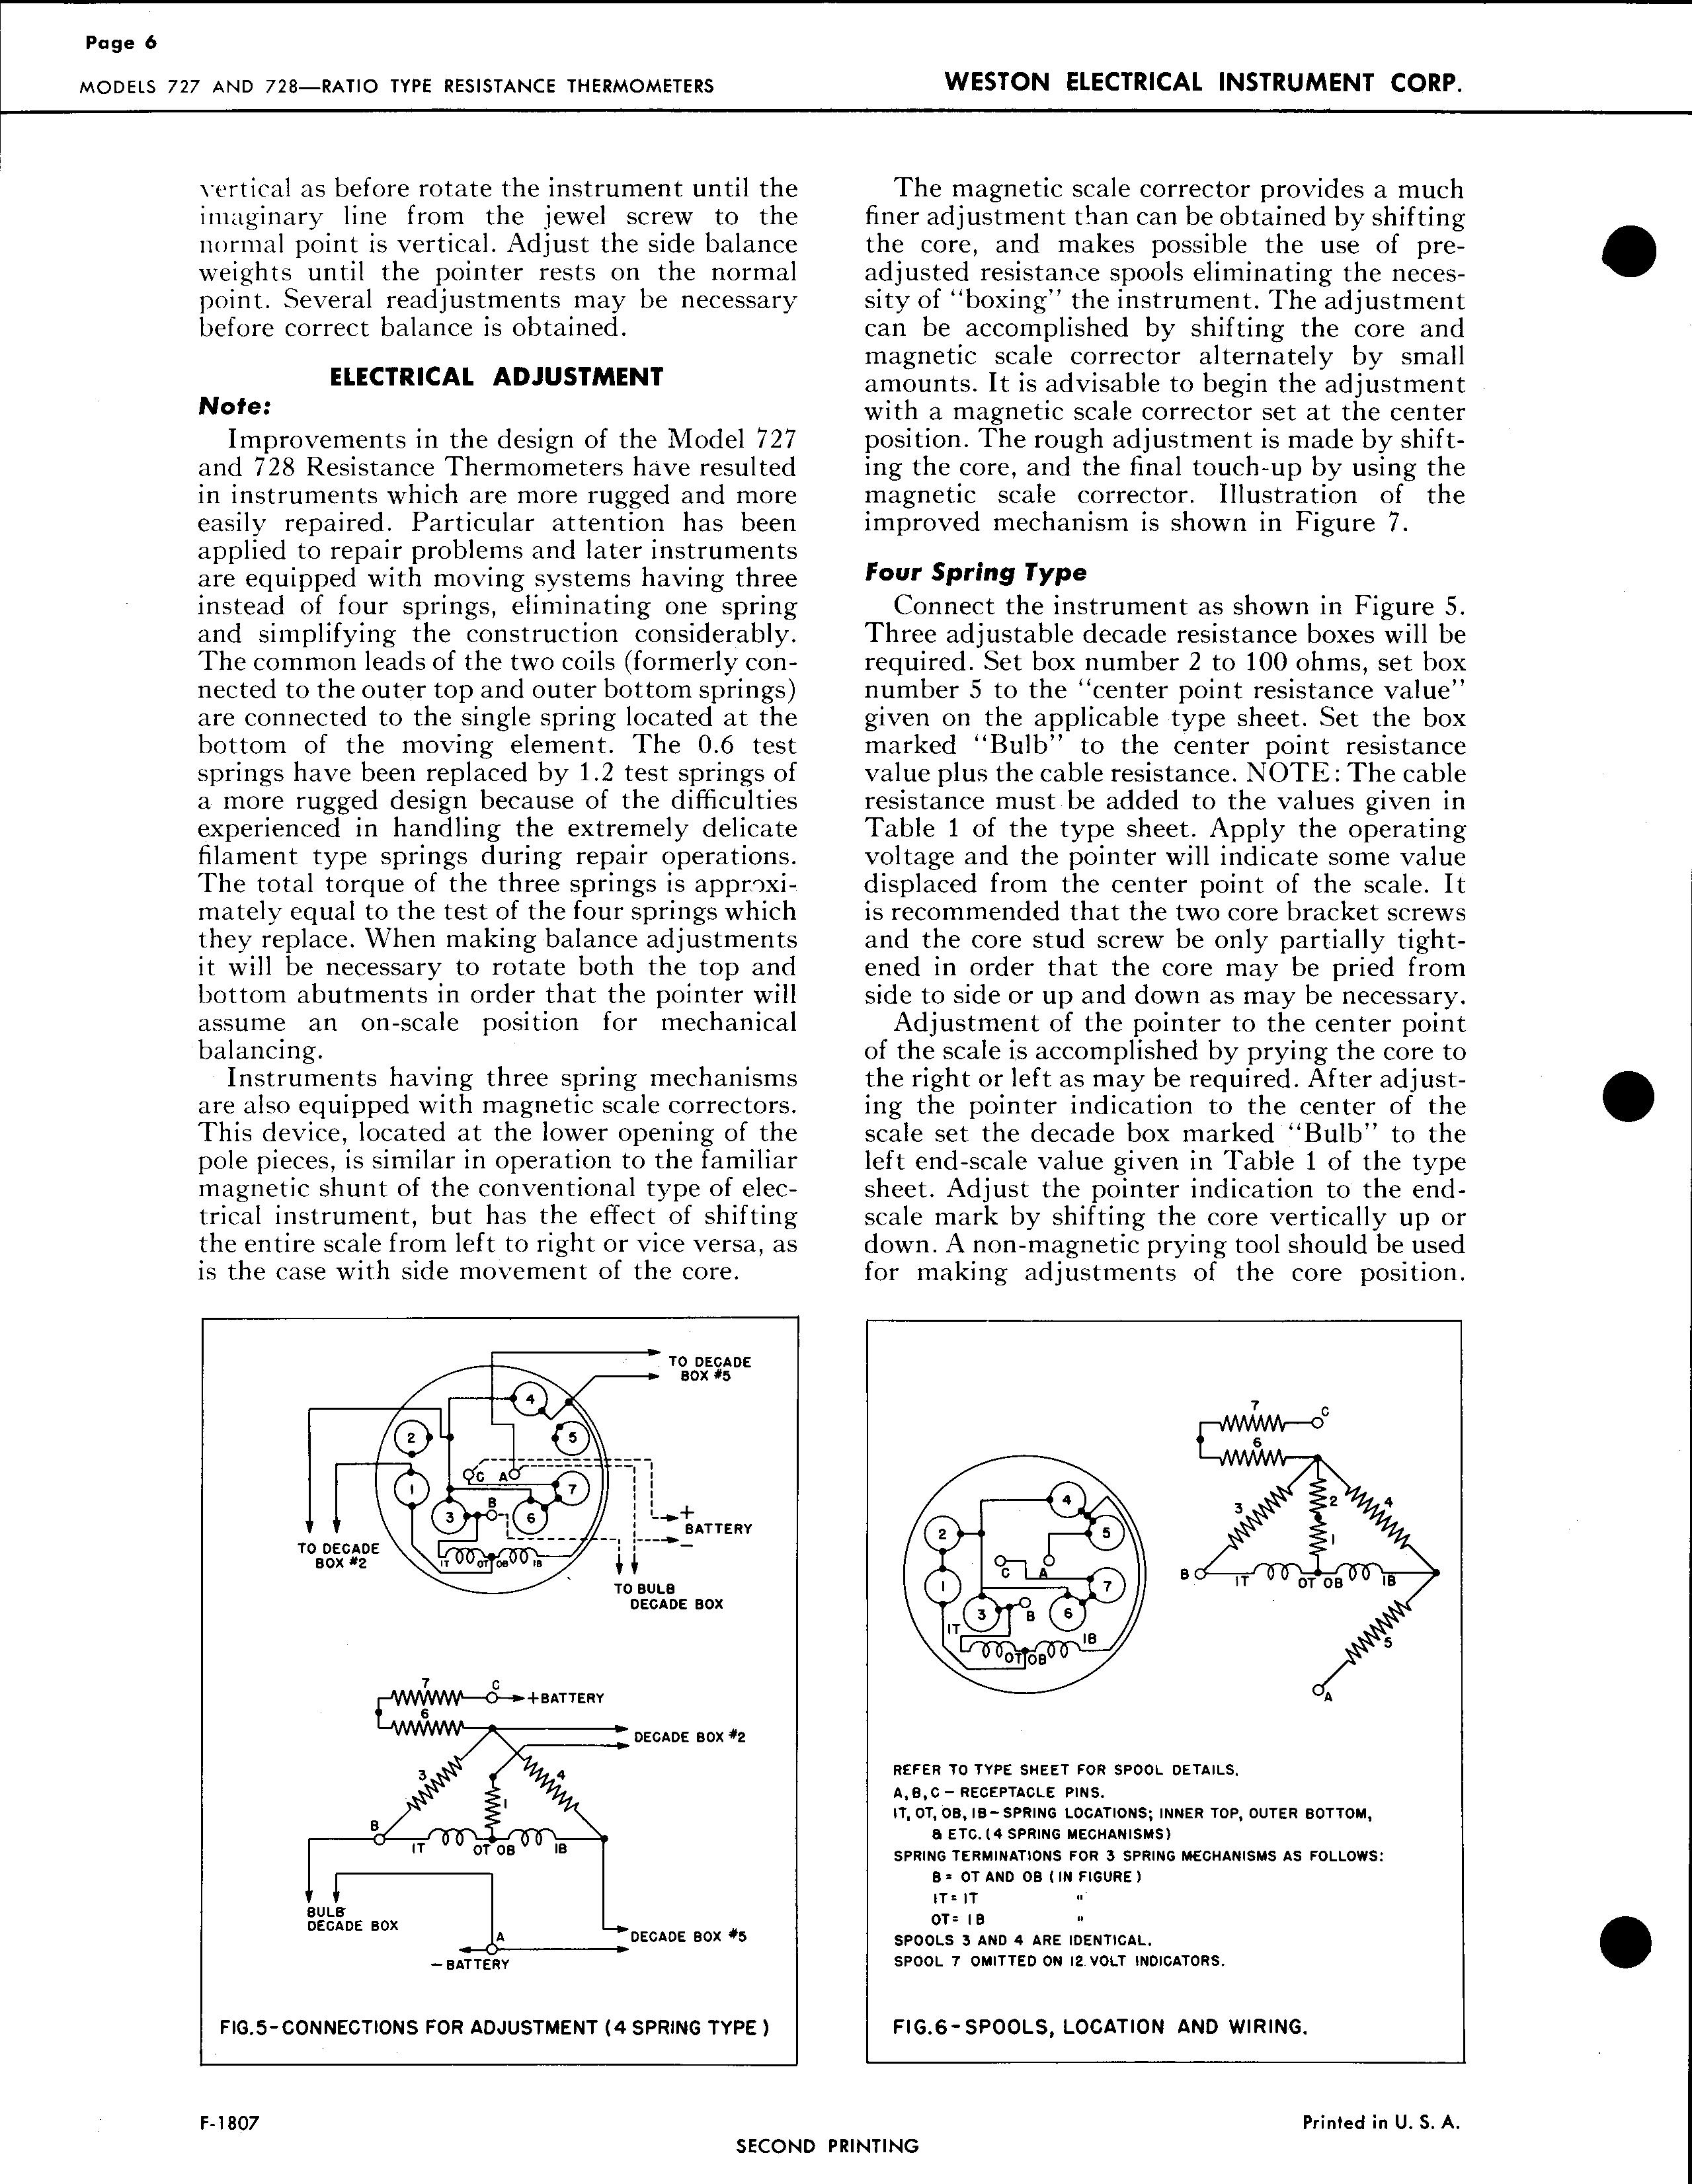 Sample page 6 from AirCorps Library document: Service Instructions for Models 727 & 728 Ratio Type Resistance Thermometers